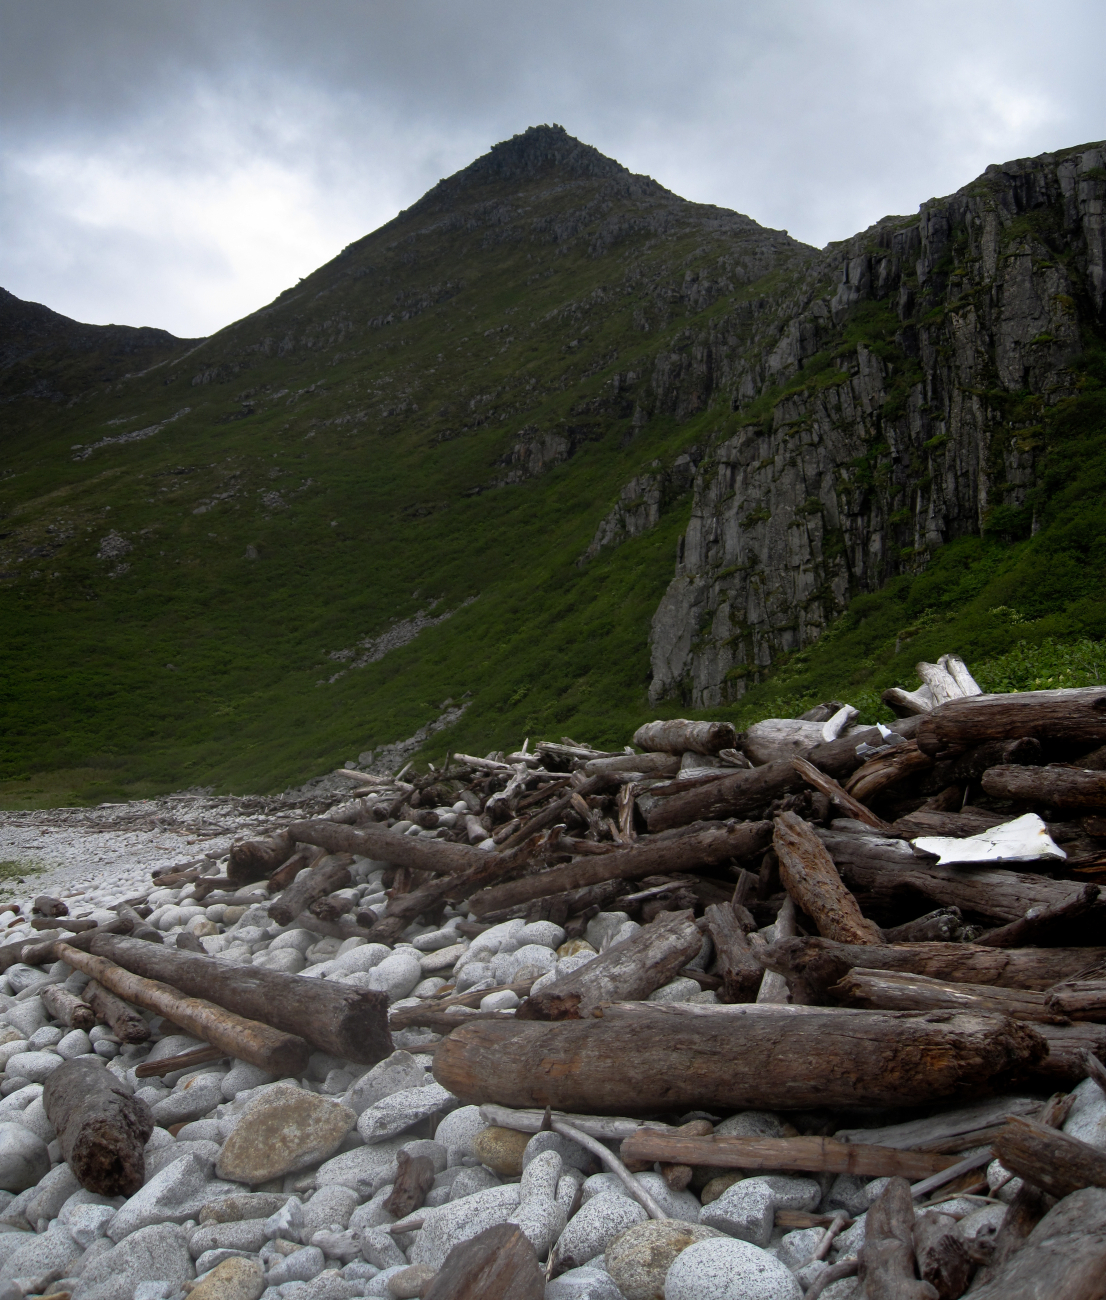 Logs and flotsam carried far up a boulder beach from storms of past winters